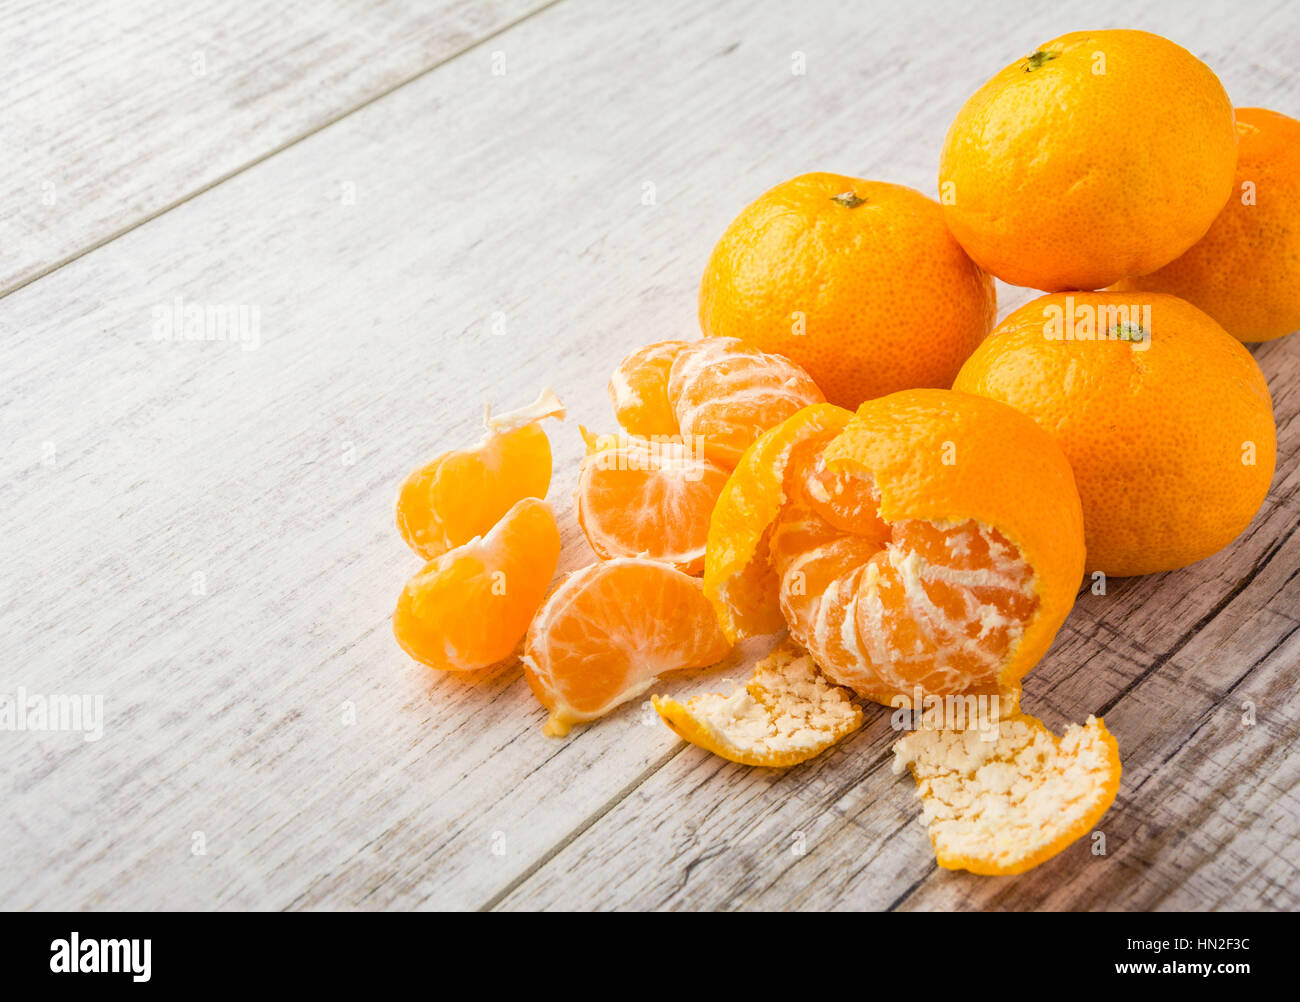 mandarines, peeled tangerine and tangerine slices on a white wooden table Stock Photo